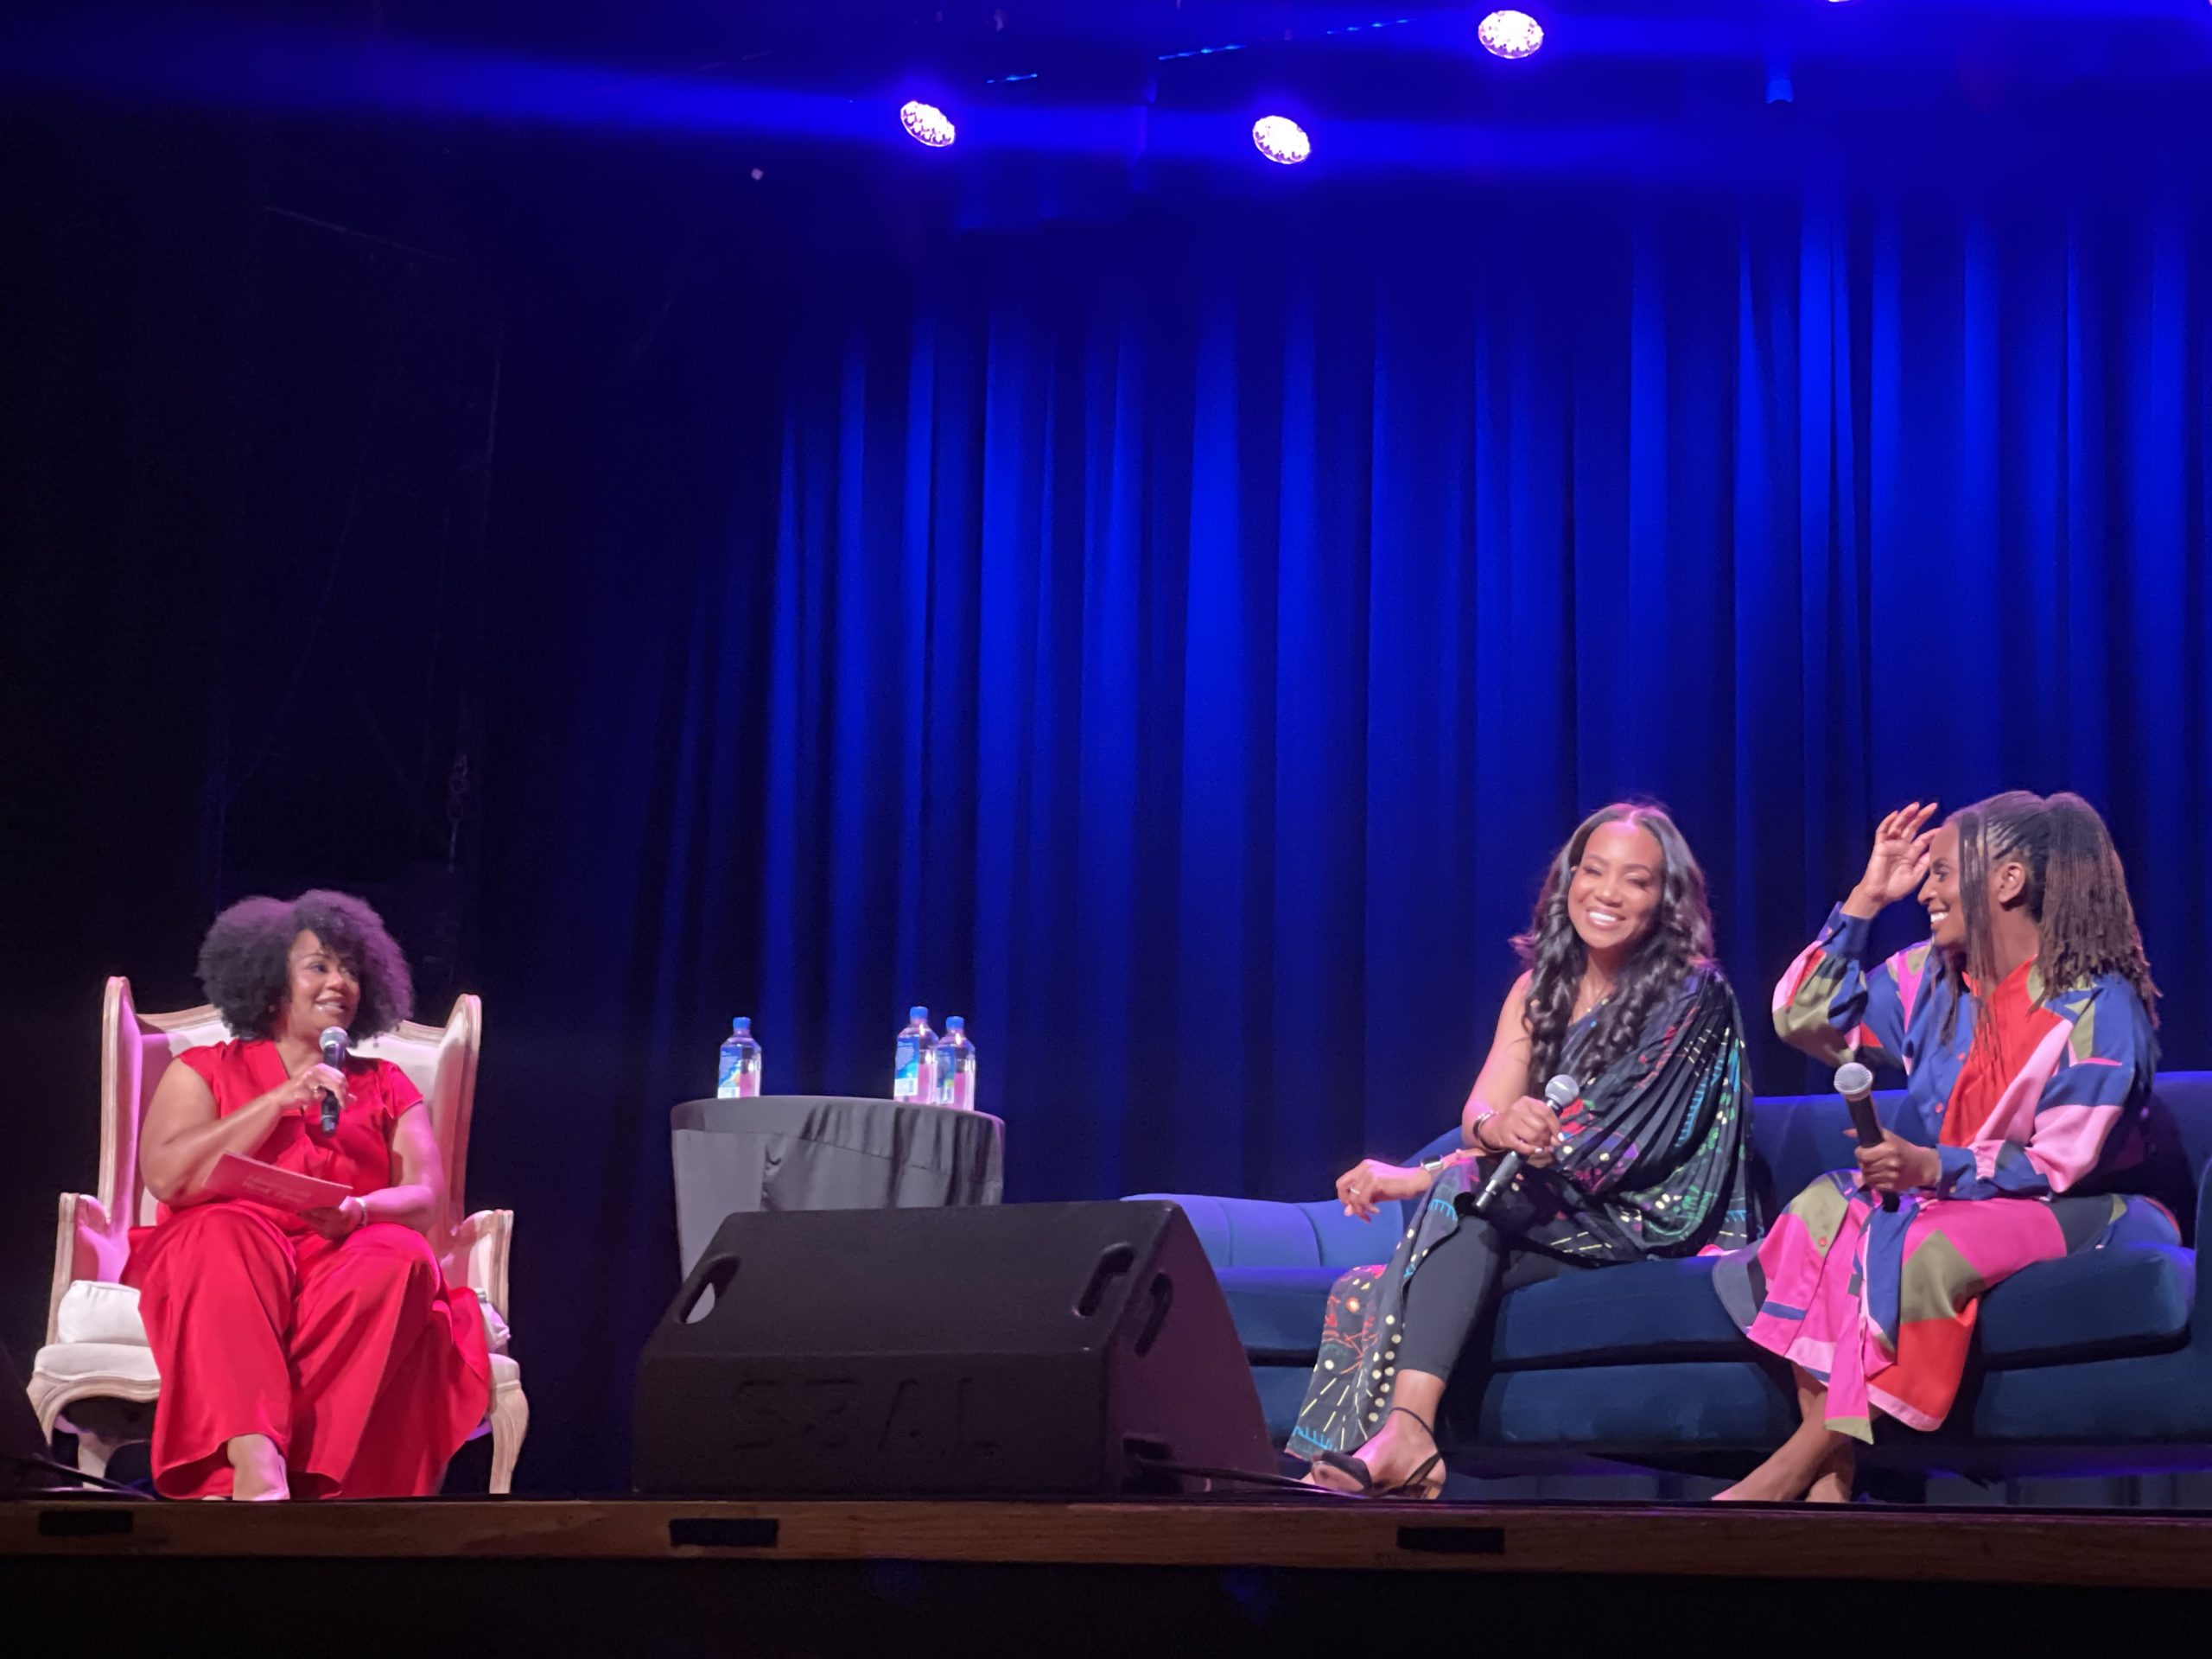 Therapy for Black Girls podcast hosts first live show to celebrate 7th anniversary 